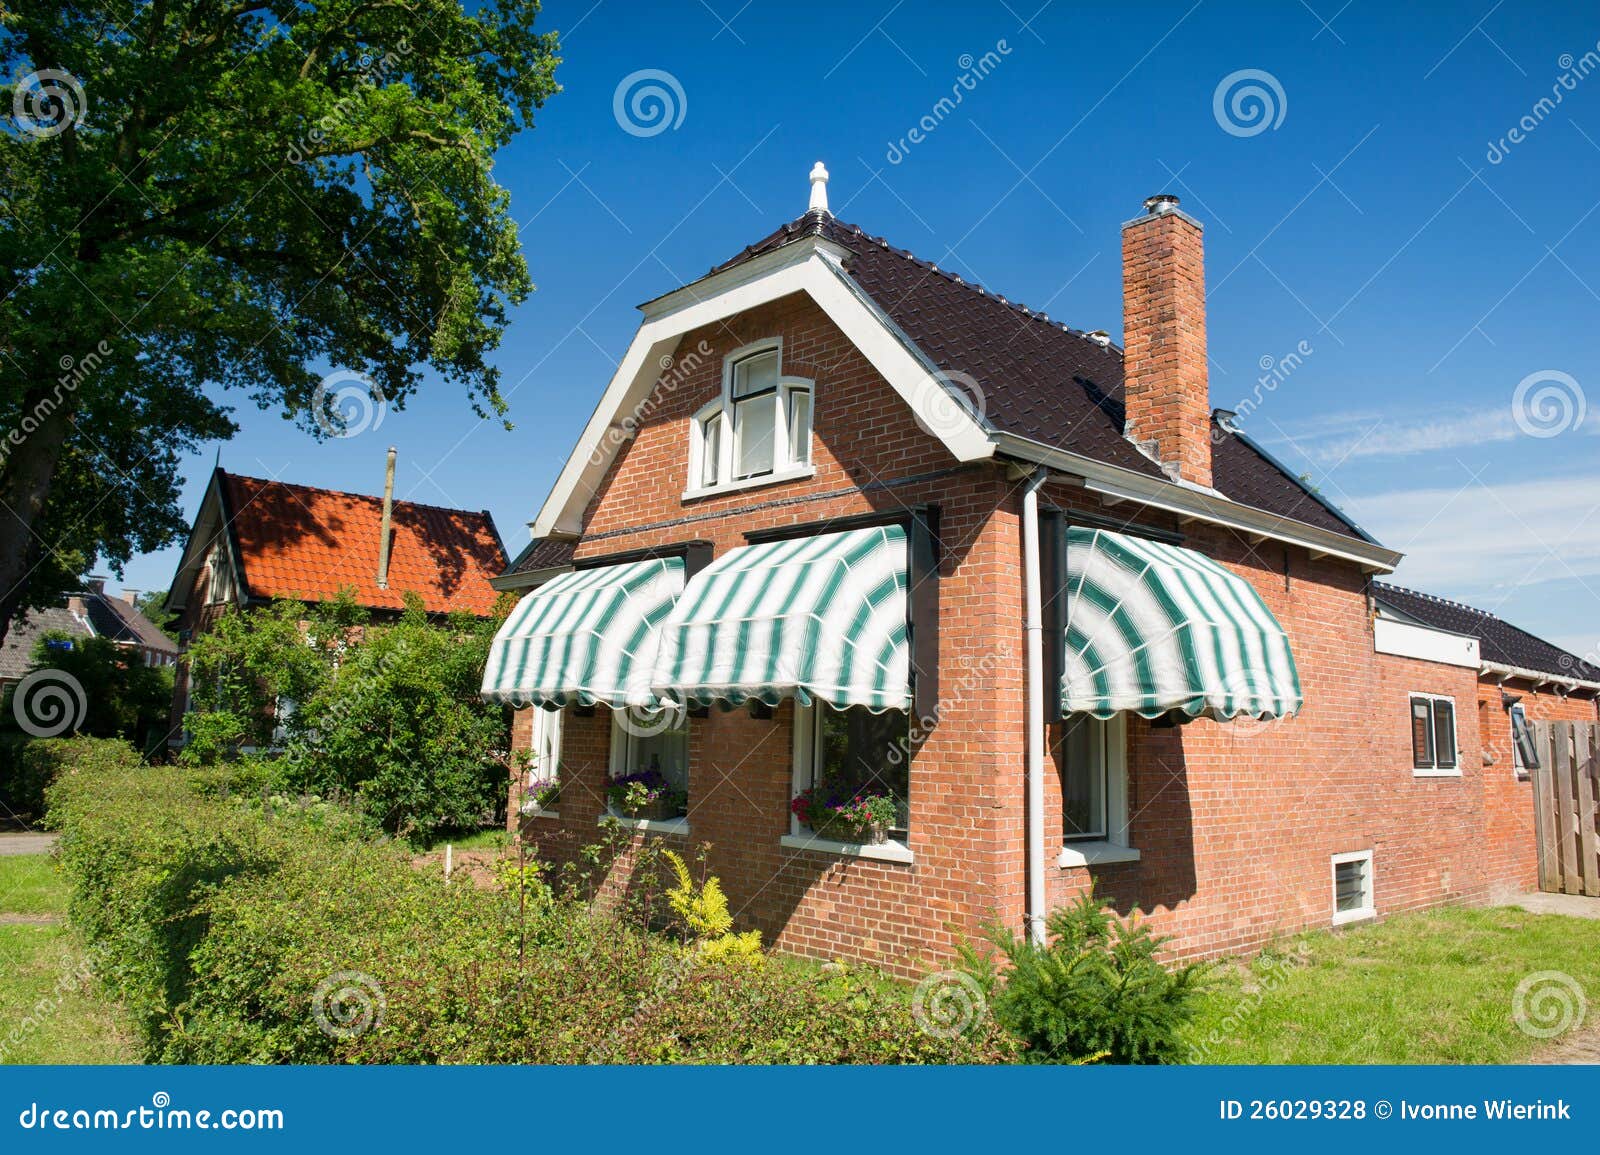 old house in friesland